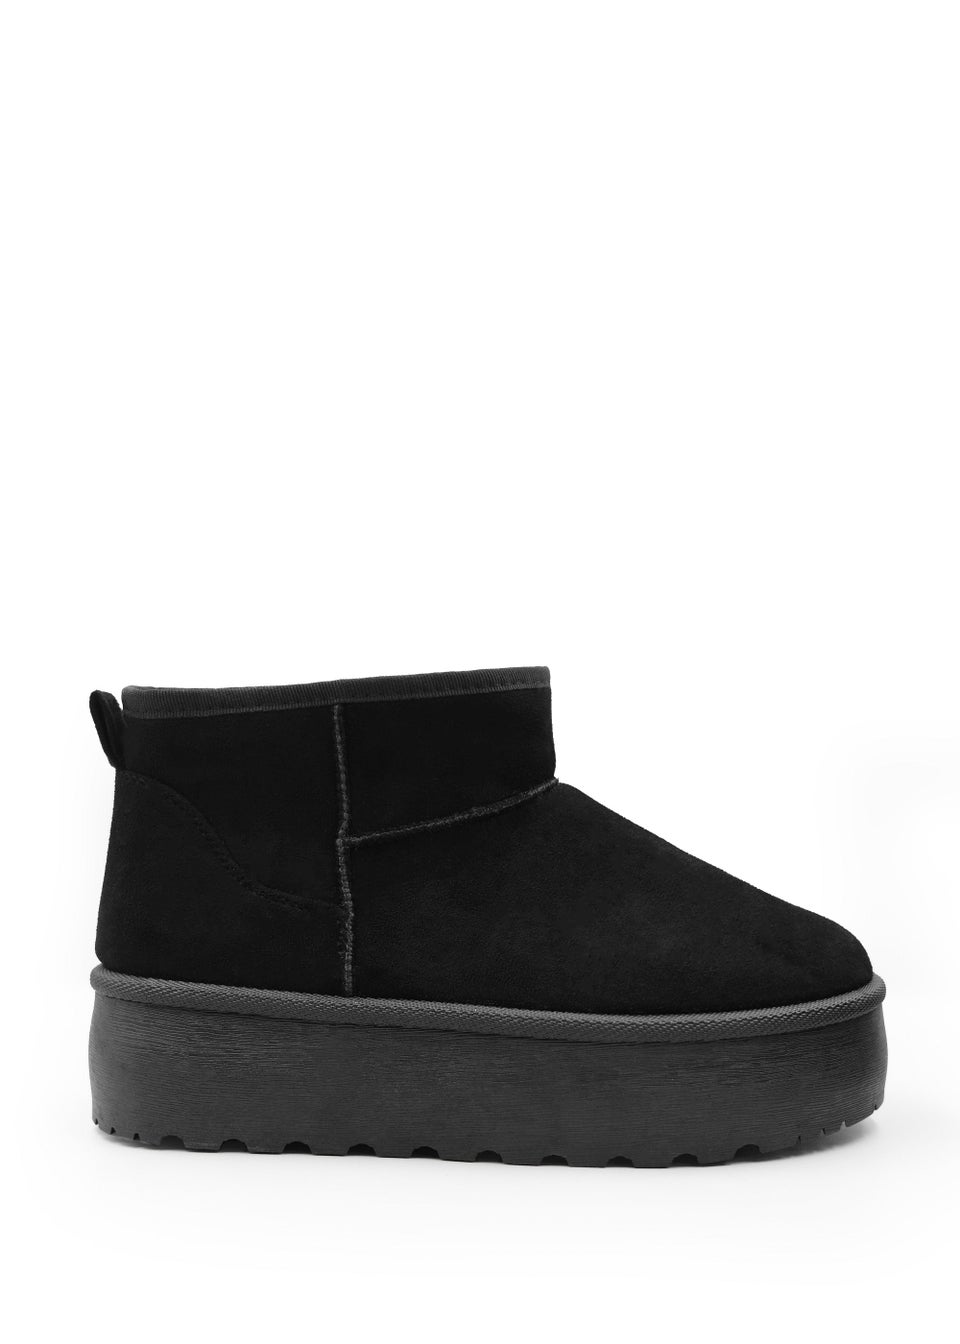 Where's That From Black Suede Erica Slip On Ankle Boots